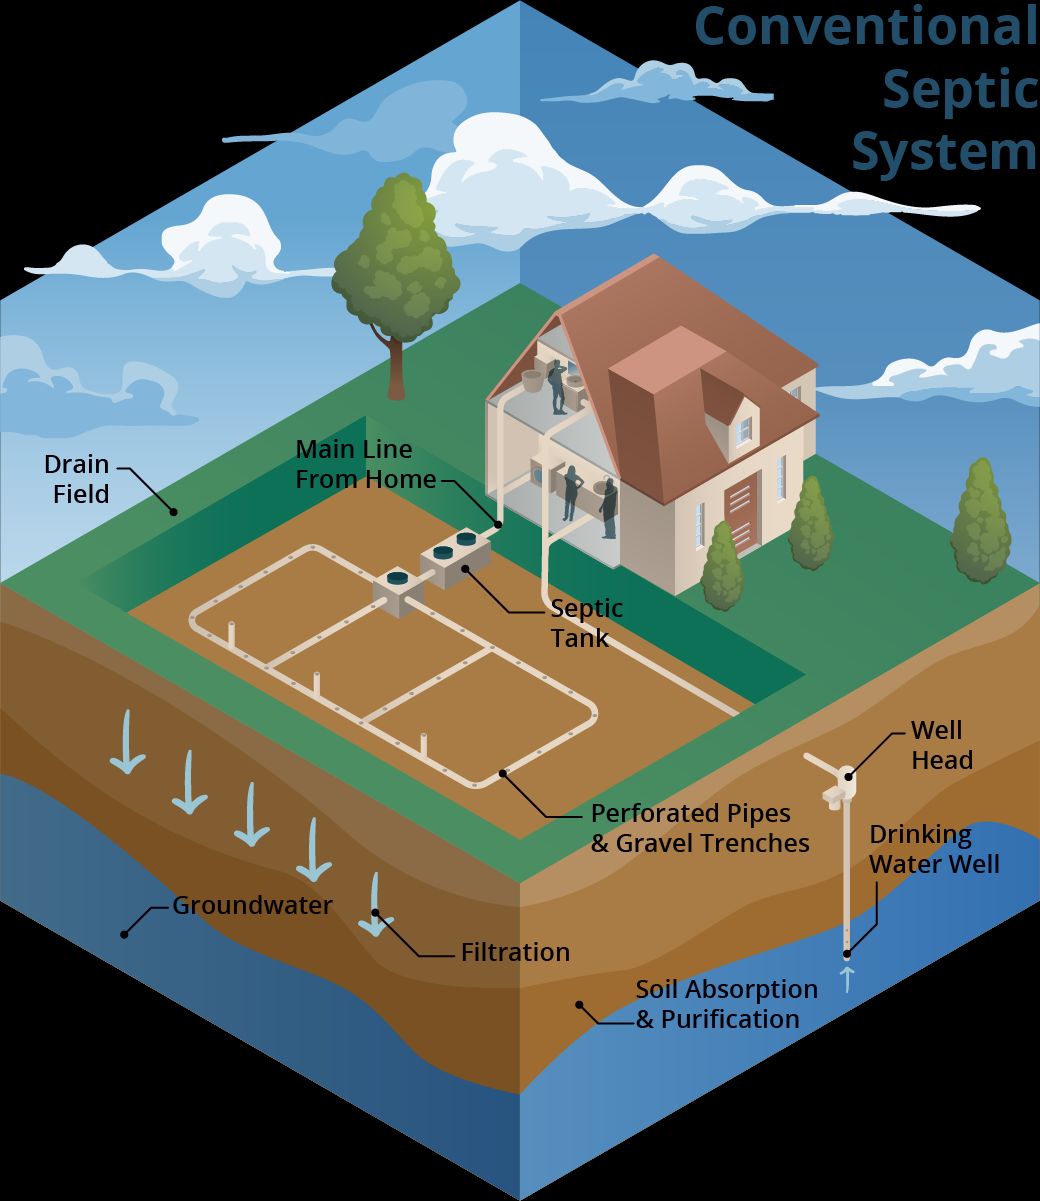 A conventional septic system. 